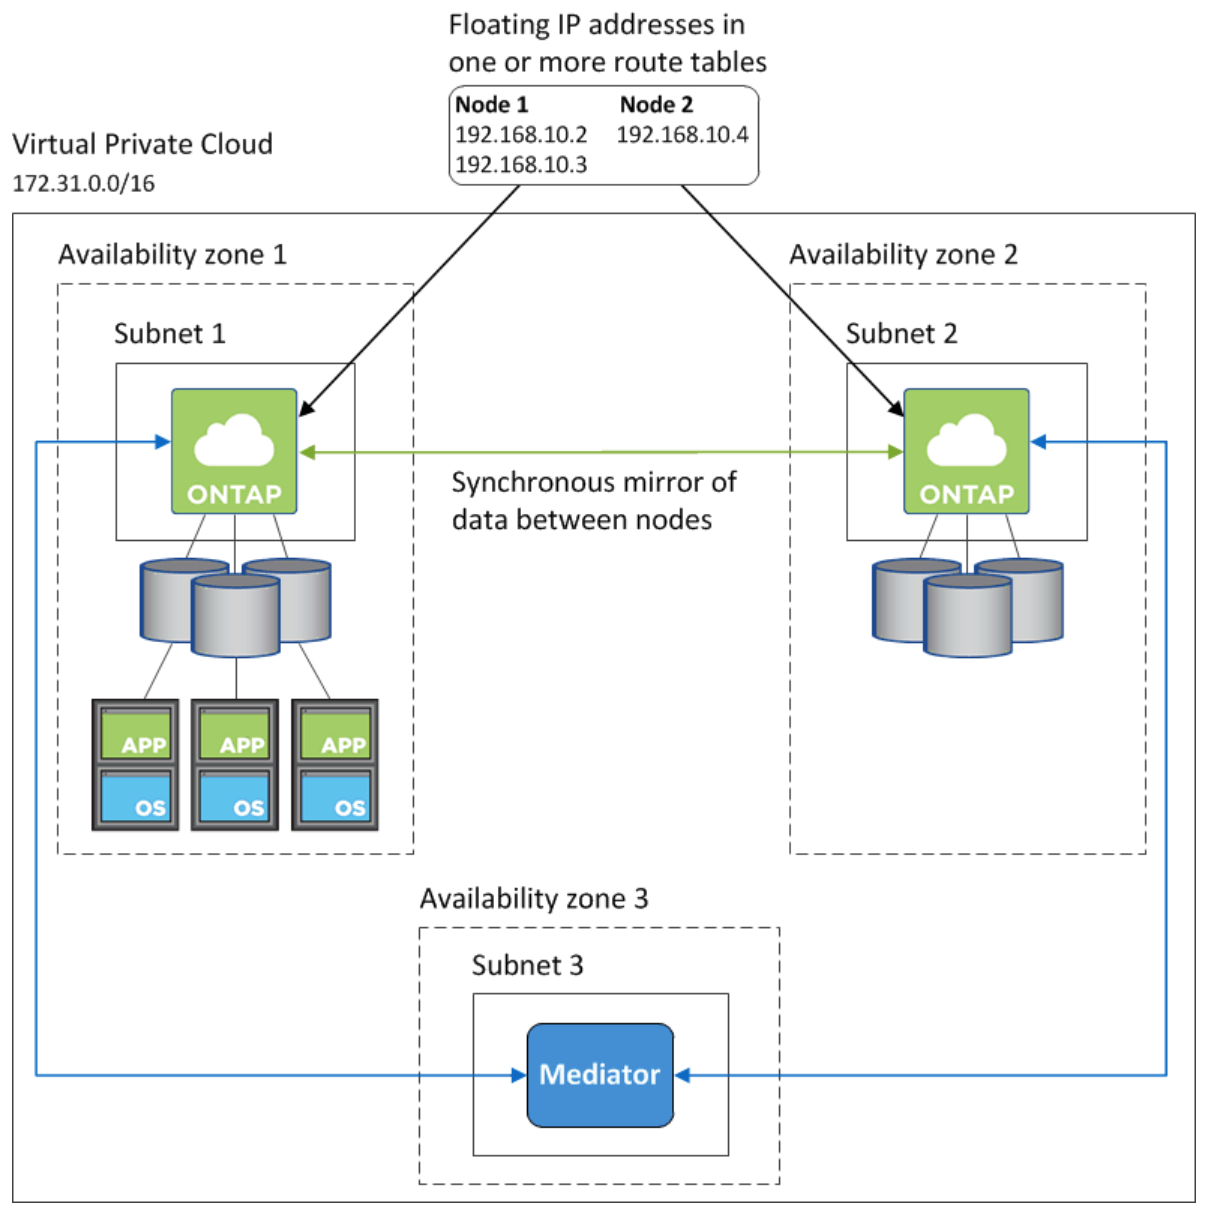 Introduction to ONTAP Cloud